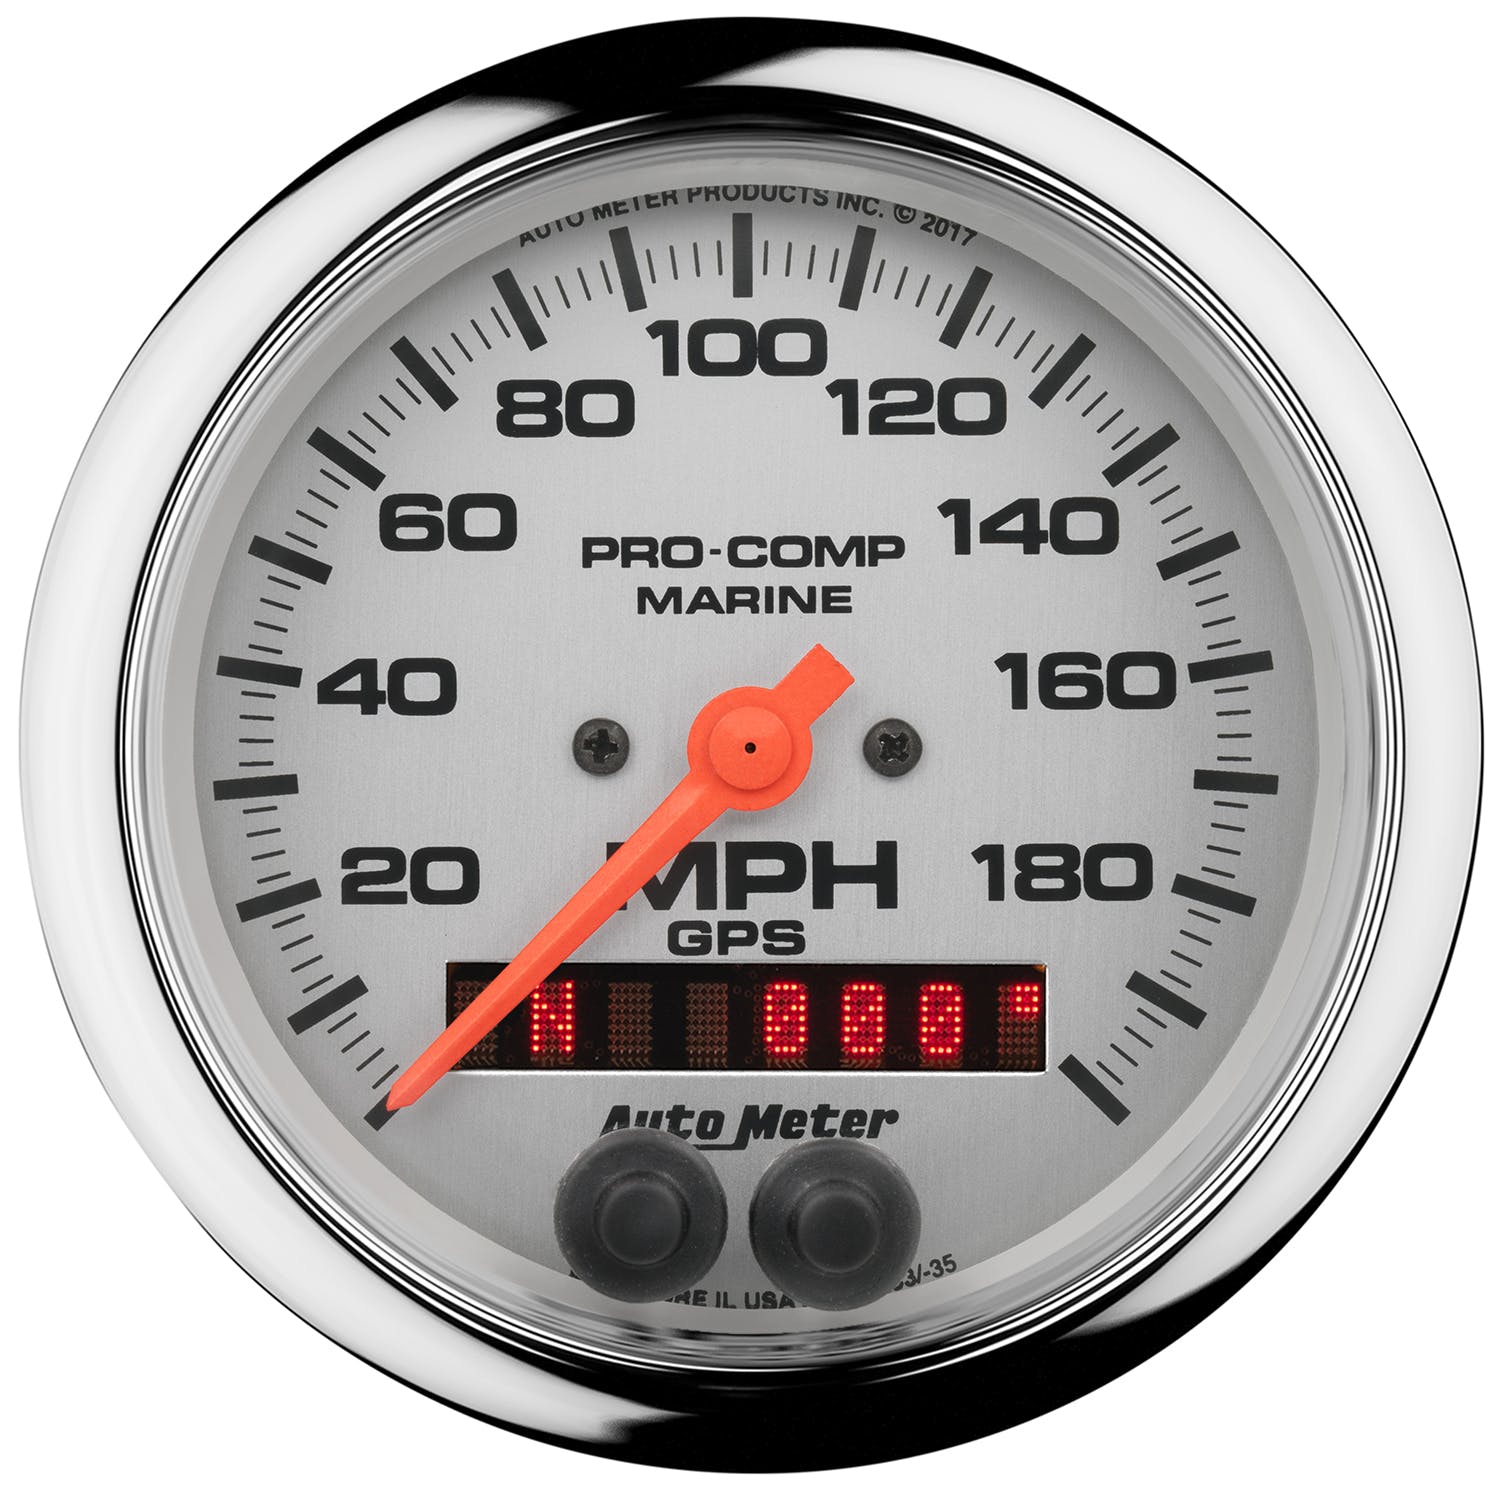 AutoMeter Products 200639-35 Marine Chrome Ultra-Lite Speedometer Gauge 3 3/8, 200MPH, GPS